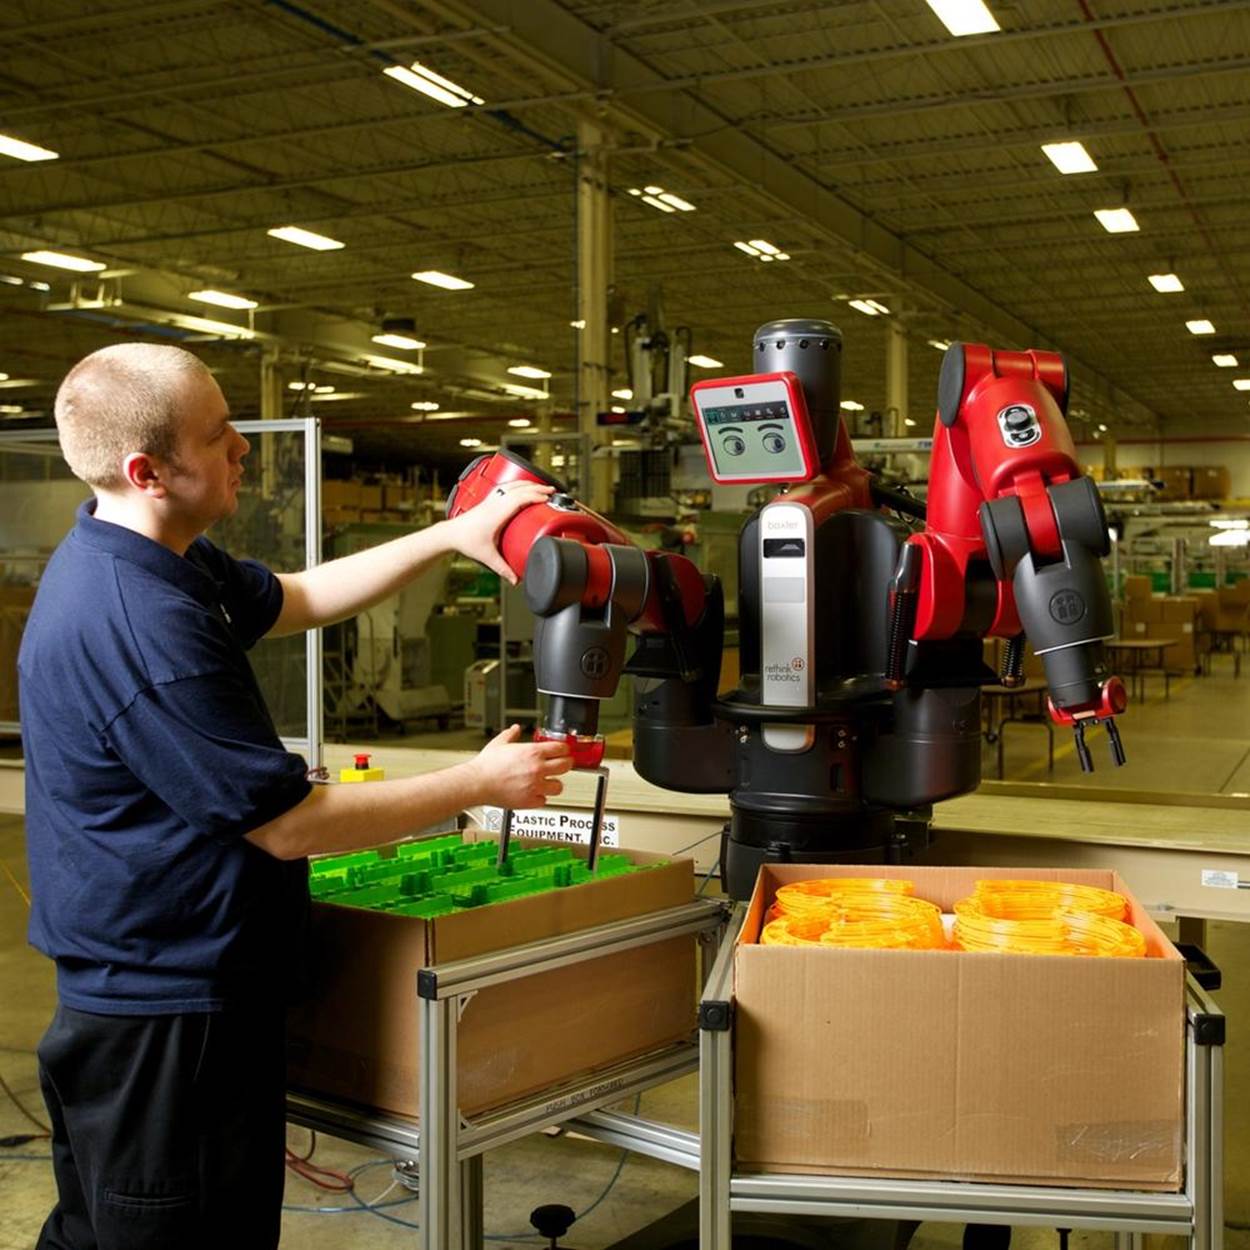 The Baxter industrial and research robot scales its movements to human speed, so it’s safer to work around. Credit: Rethink Robotics.